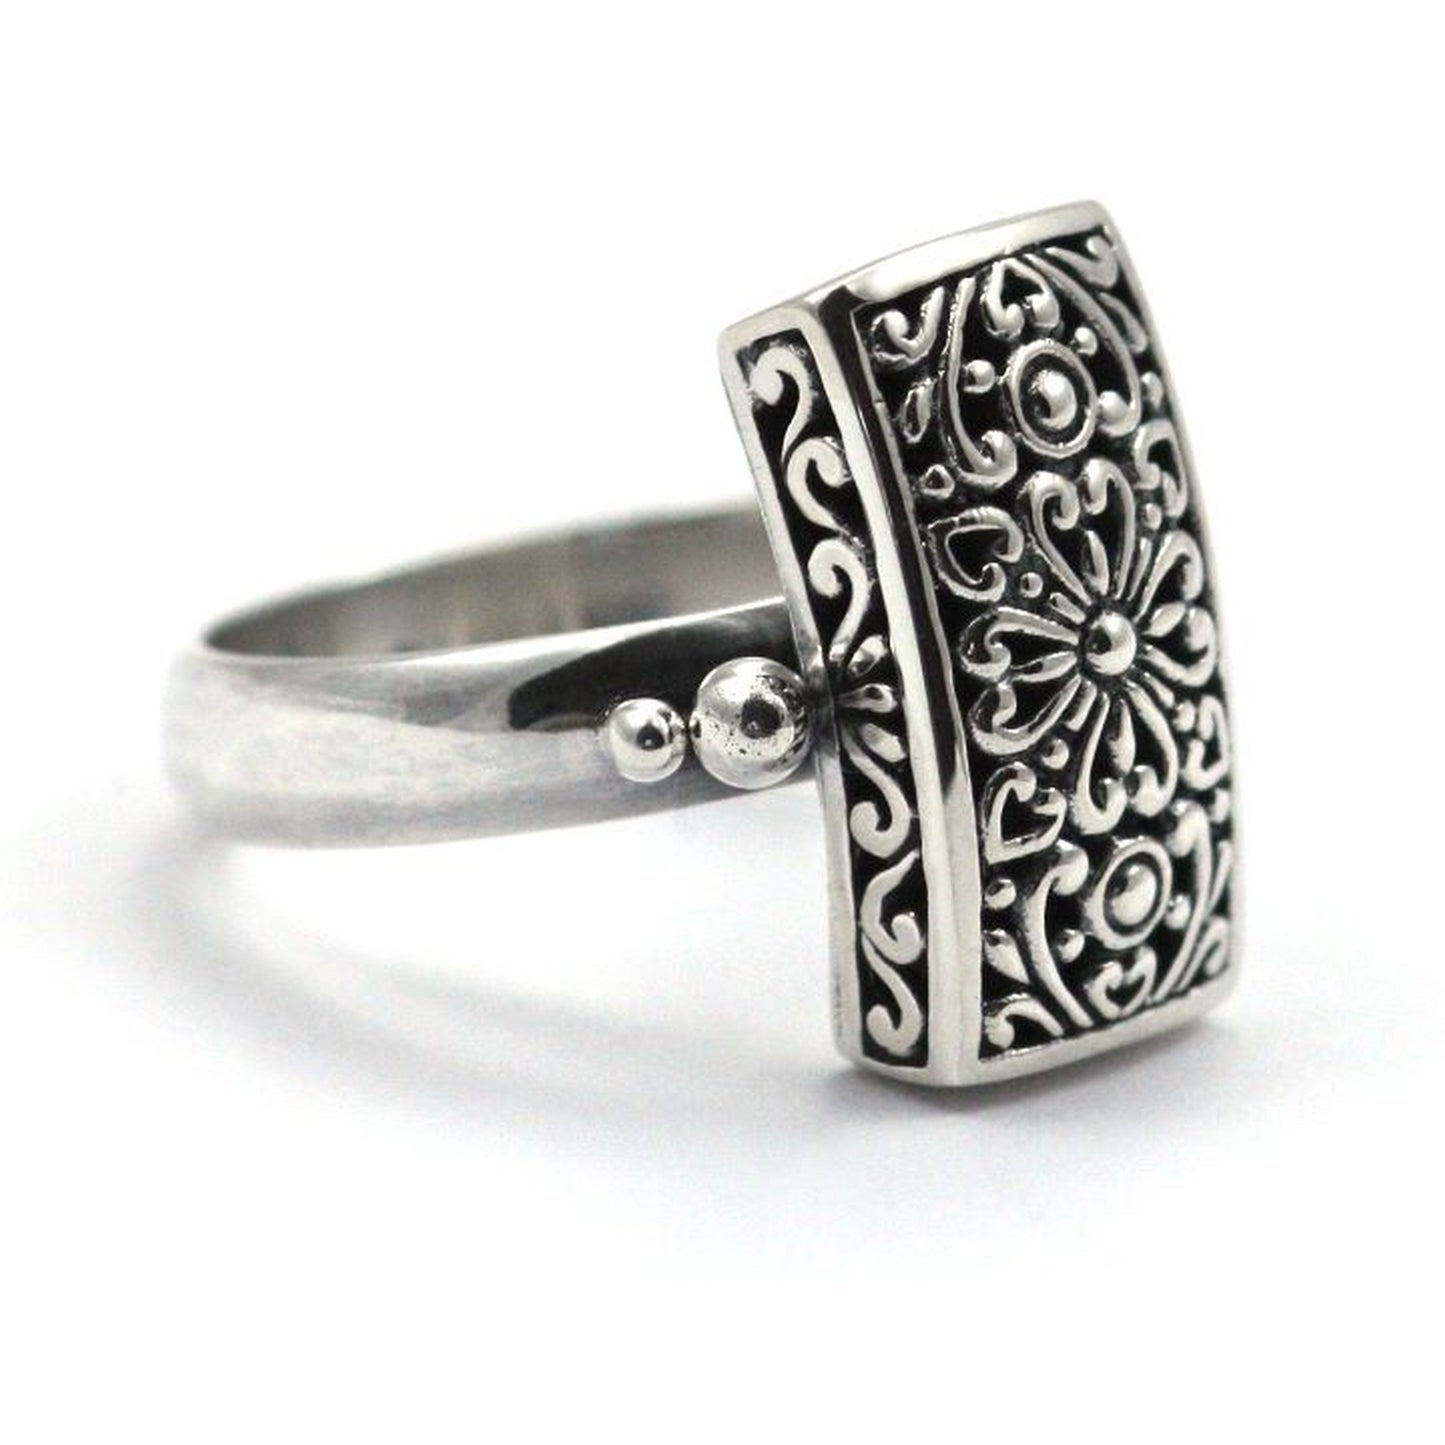 R102 KASI .925 Sterling Silver Ring With Rectangular Floral Design